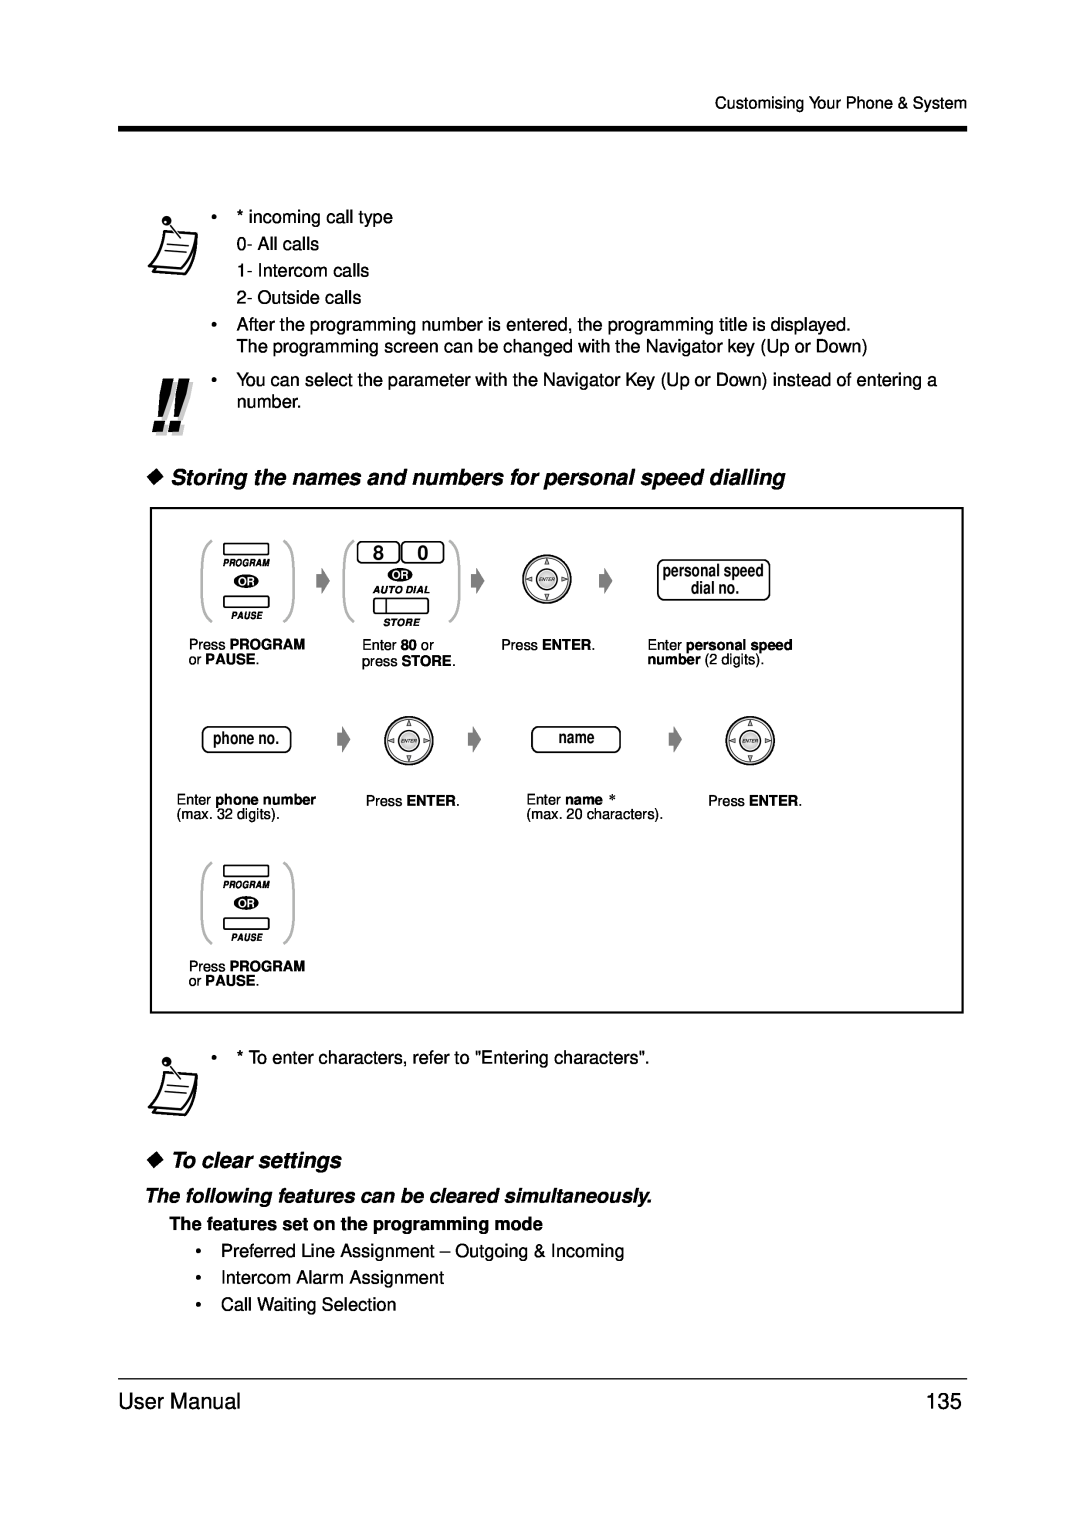 Panasonic KX-TDA200 user manual To clear settings, dial no, name, The features set on the programming mode 